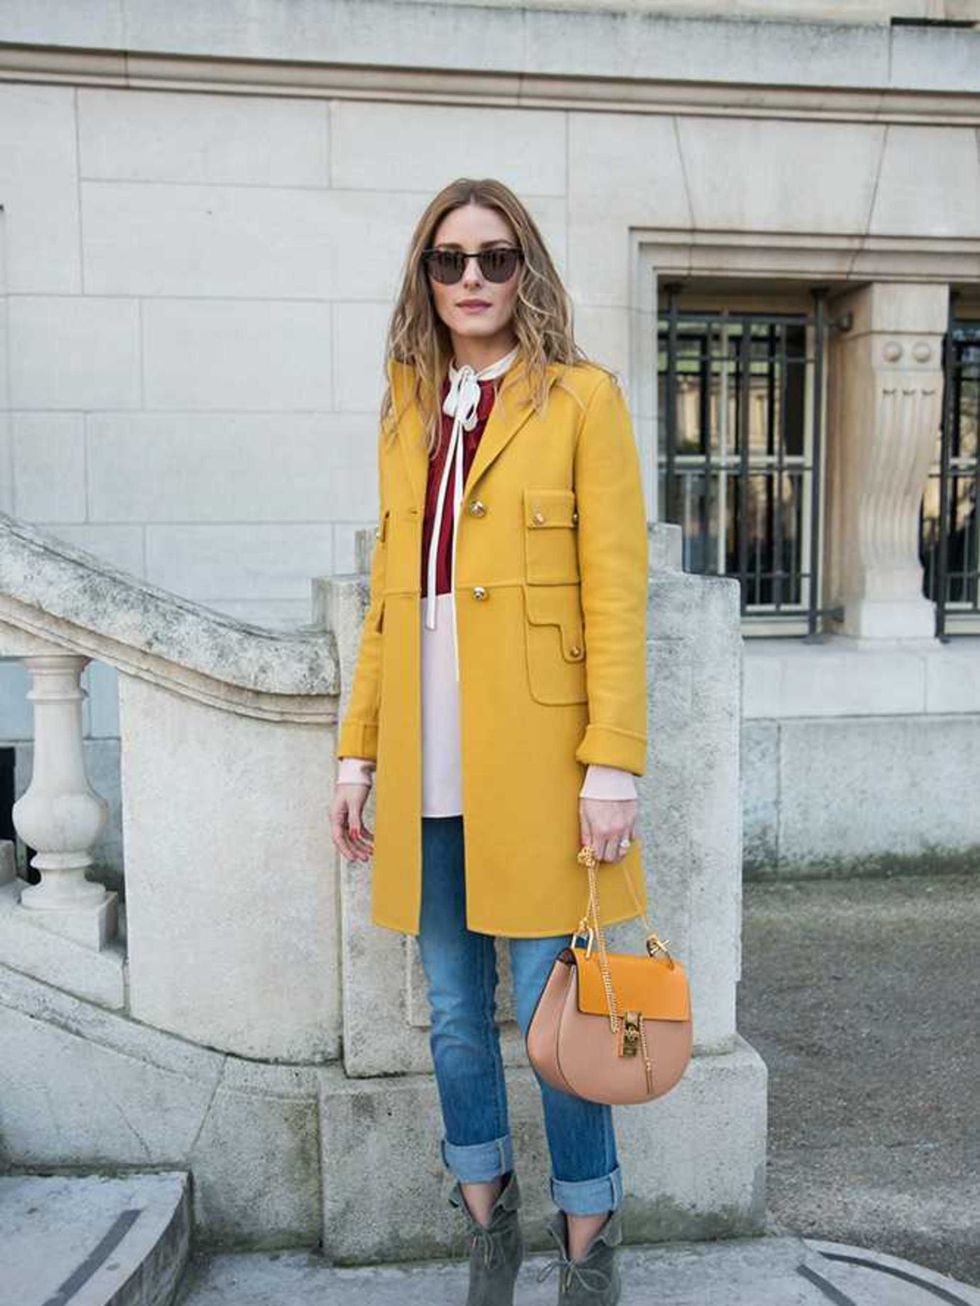 Olivia Palermo arrives for the Chloe a/w15 show during Paris Fashion Week, March 2015.